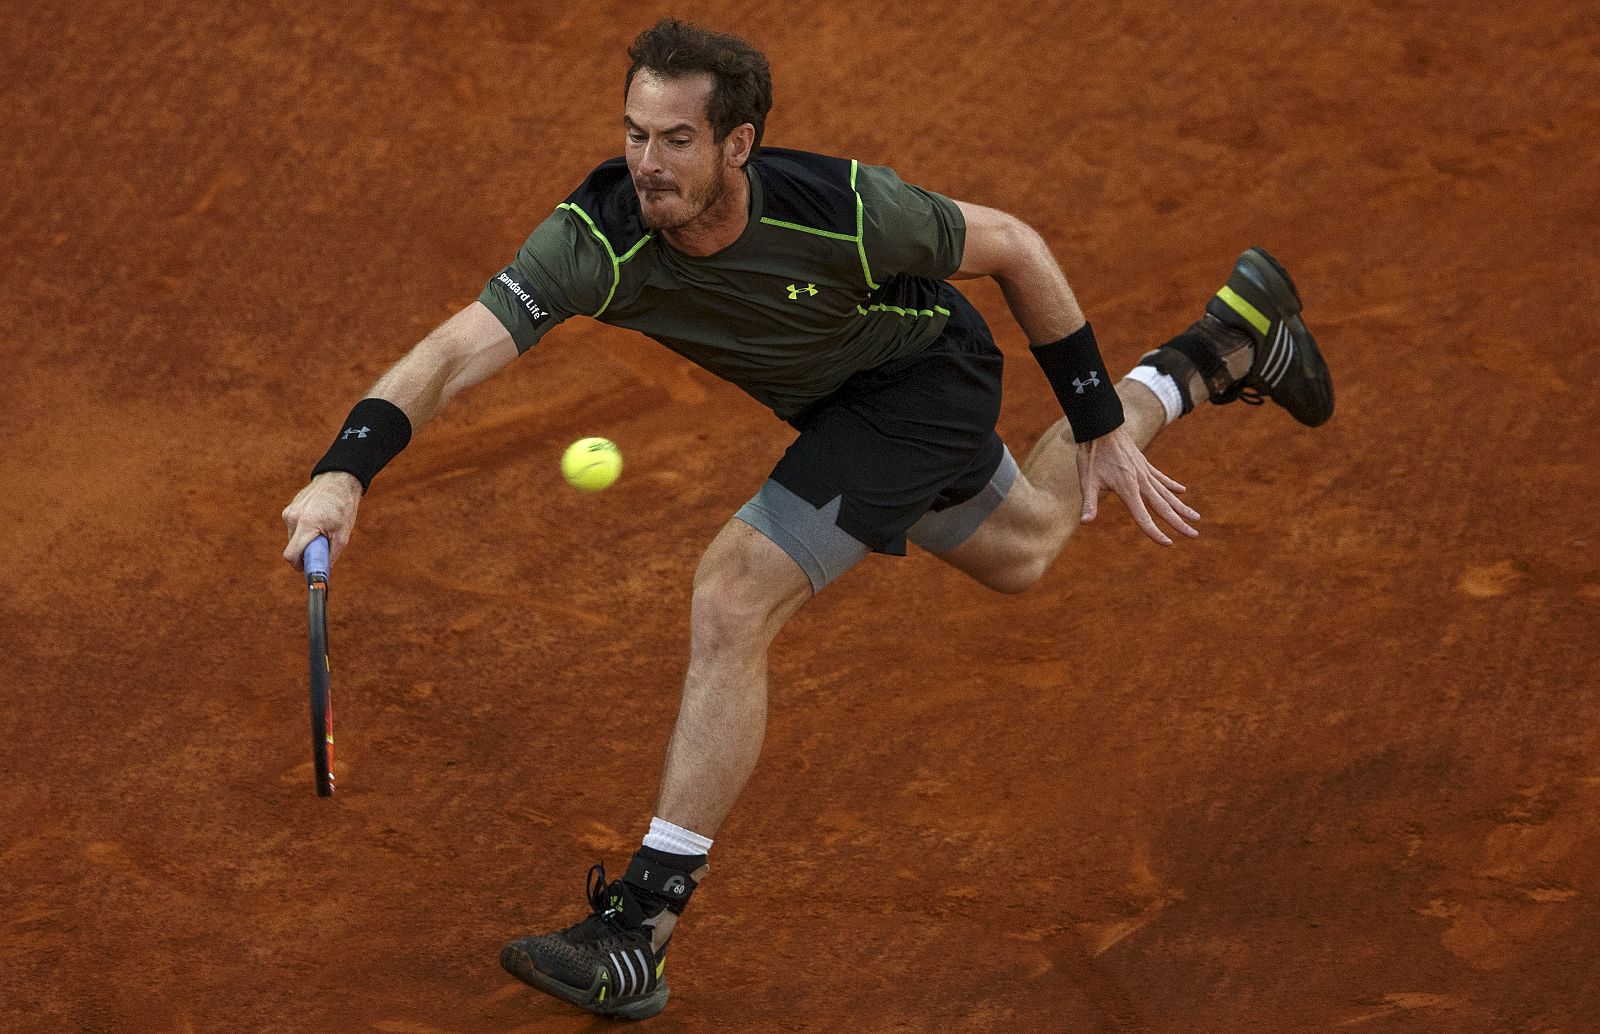 Britain's Murray returns a forehand to Canada's Raonic during their quarterfinal match at the Madrid Open tennis tournament in Madrid